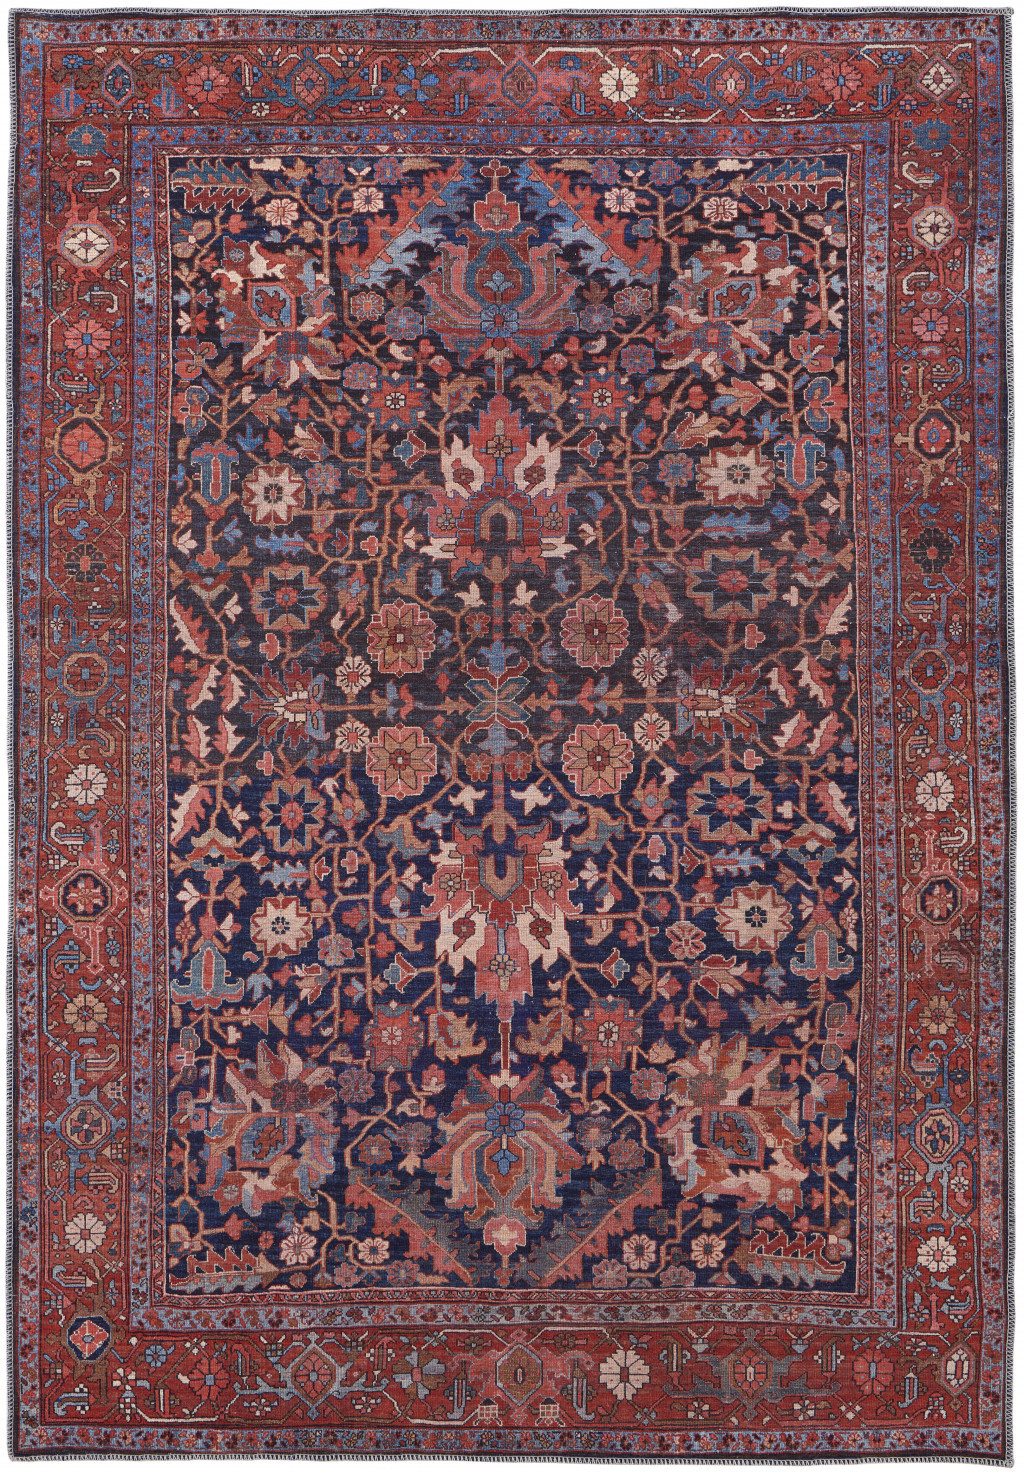 10' X 14' Red Orange And Blue Floral Power Loom Area Rug-515123-1